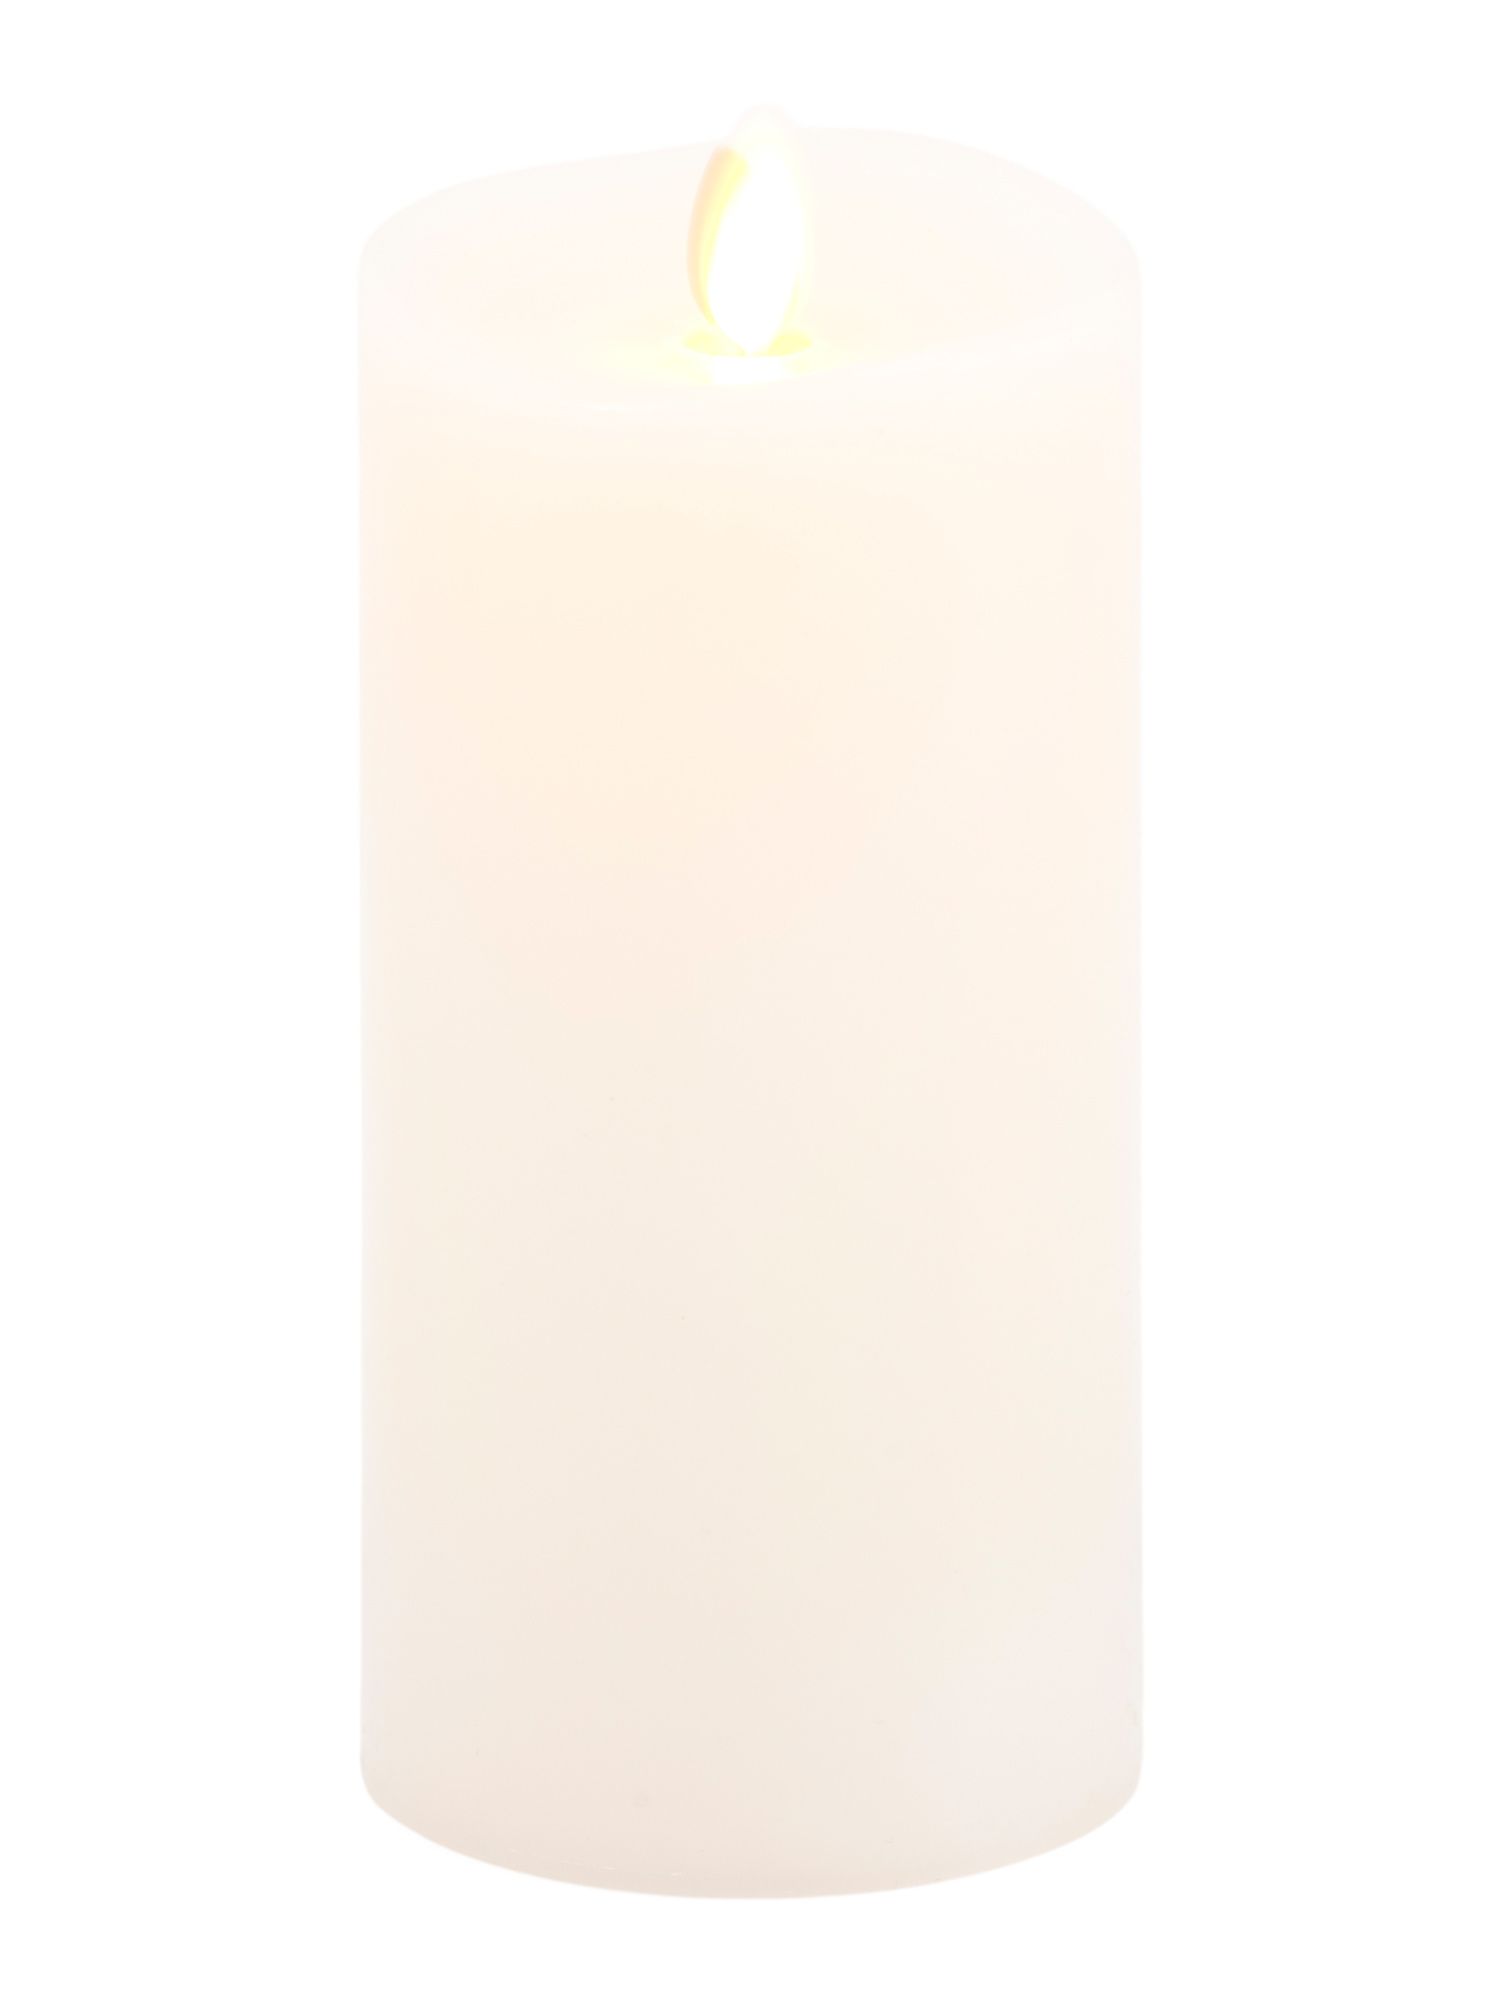 7in Melted Smooth Unscented Moving Flame Led Pillar Candle | TJ Maxx